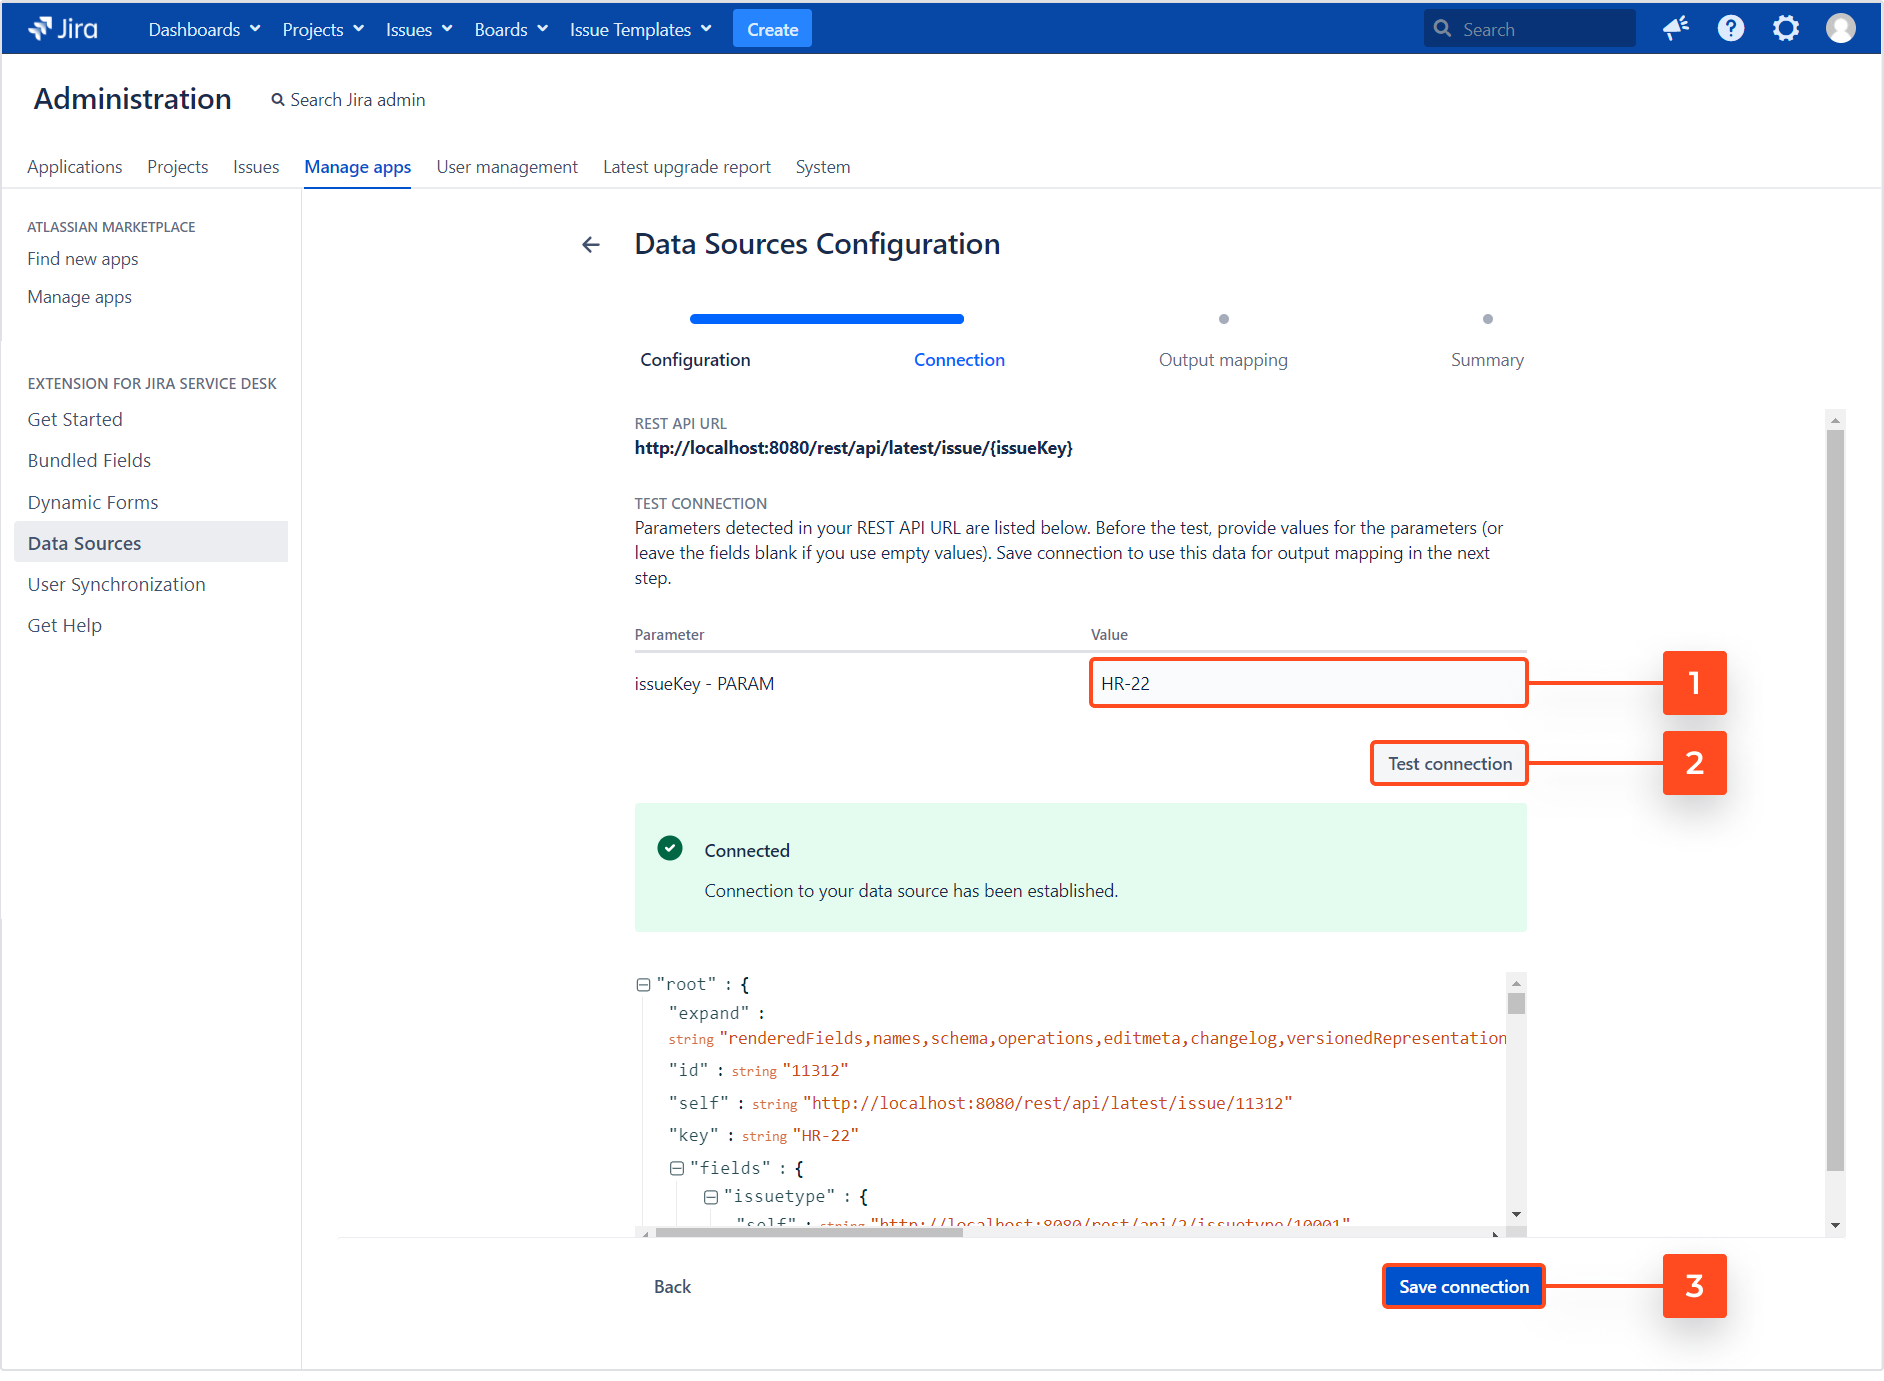 Extension for Jira Service Management - Bundled Fields Data Sources: Test connection with additional parameters